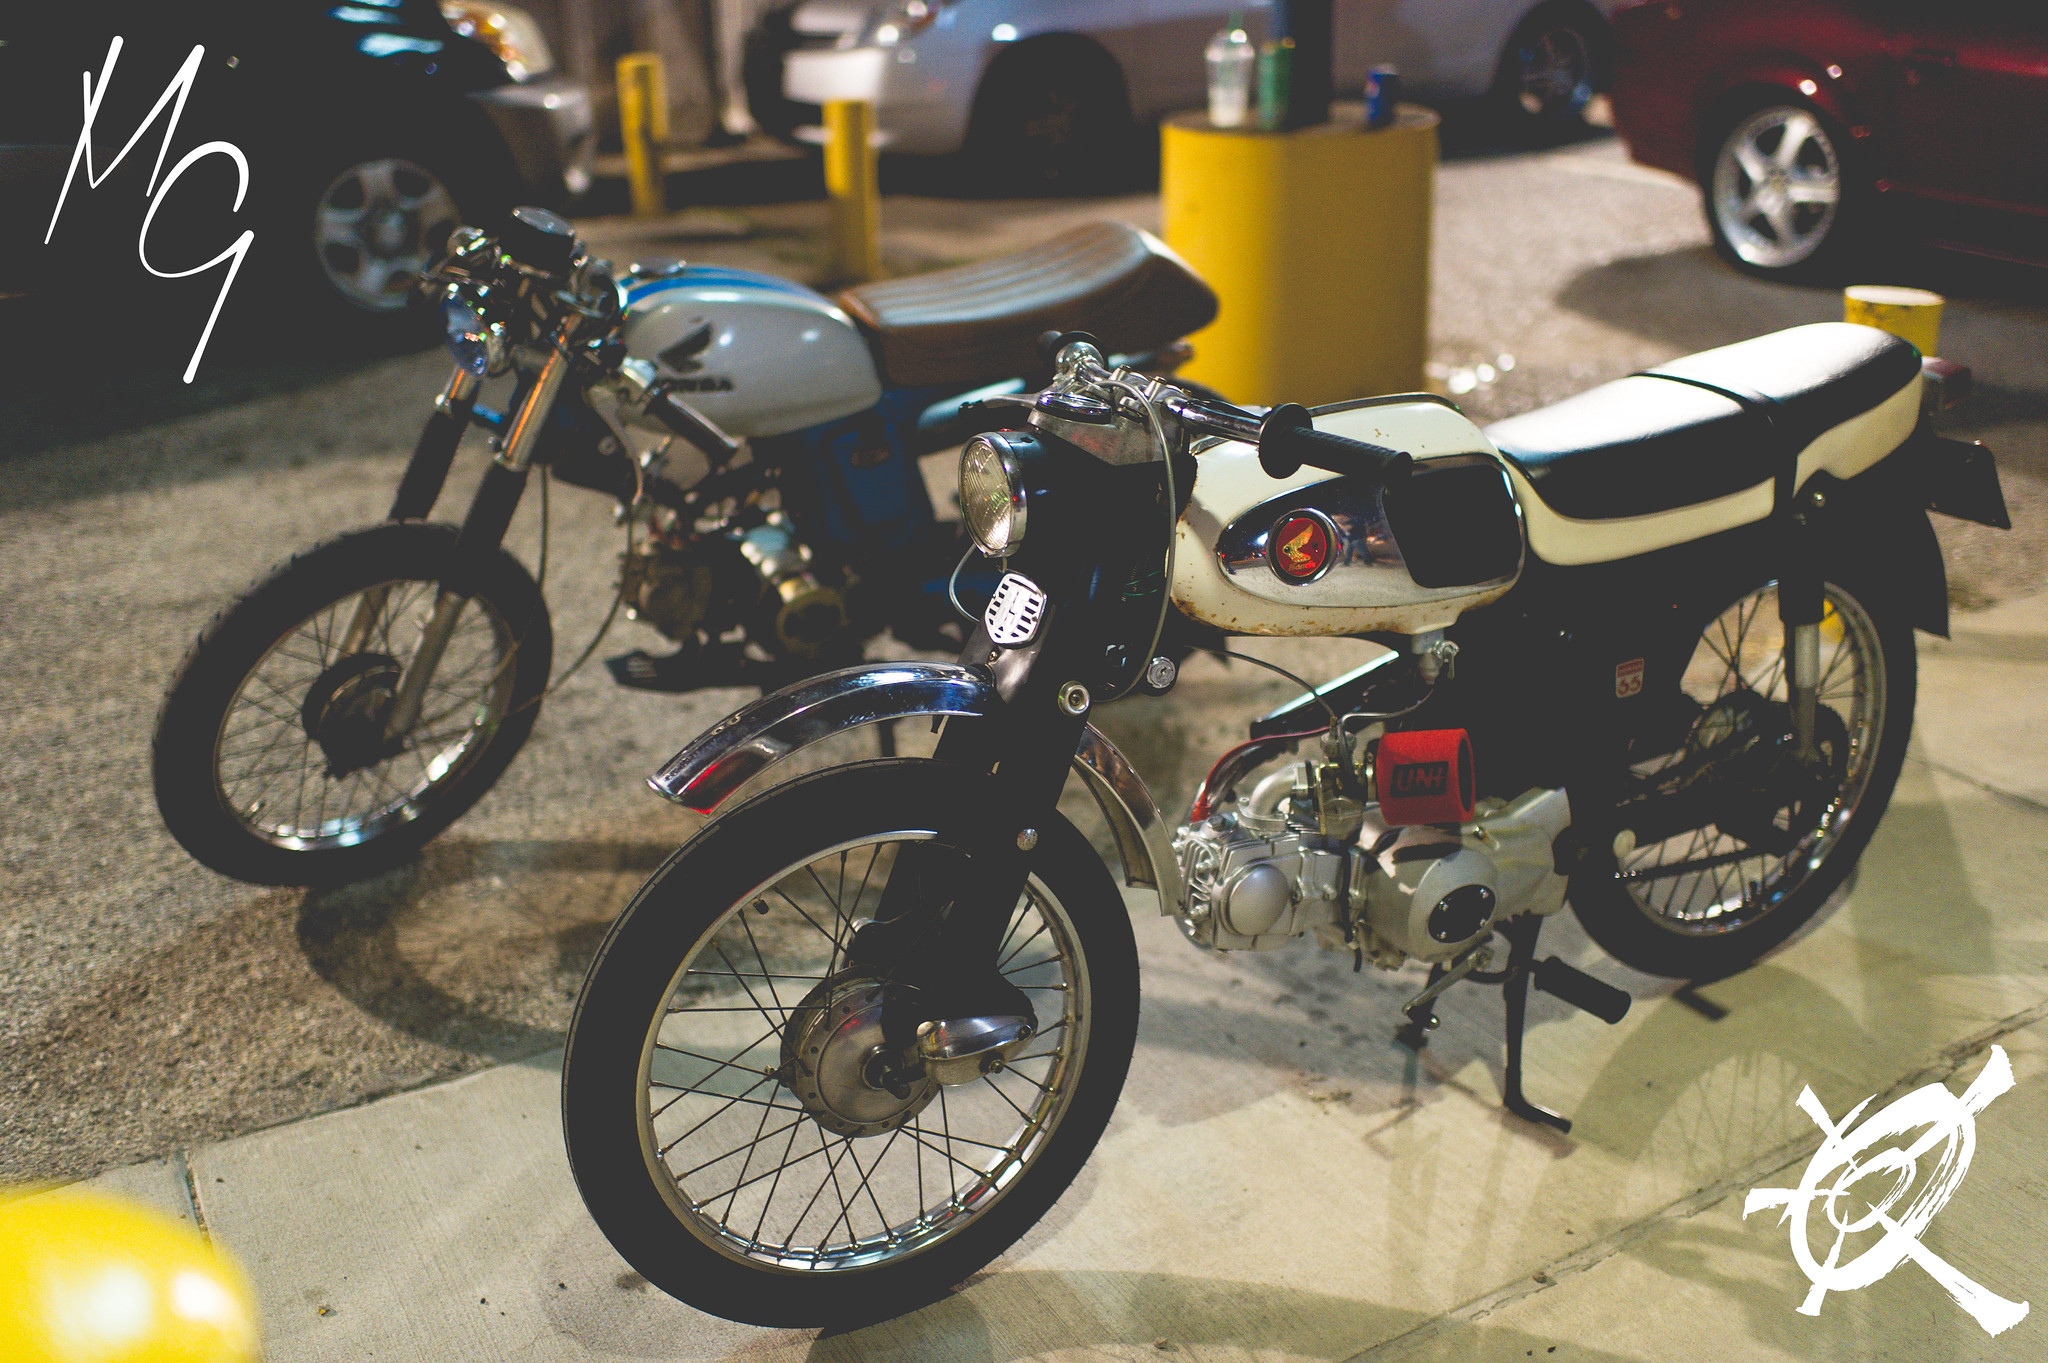 These two vintage Cafe Racers from Austin also made the trip to JNCM